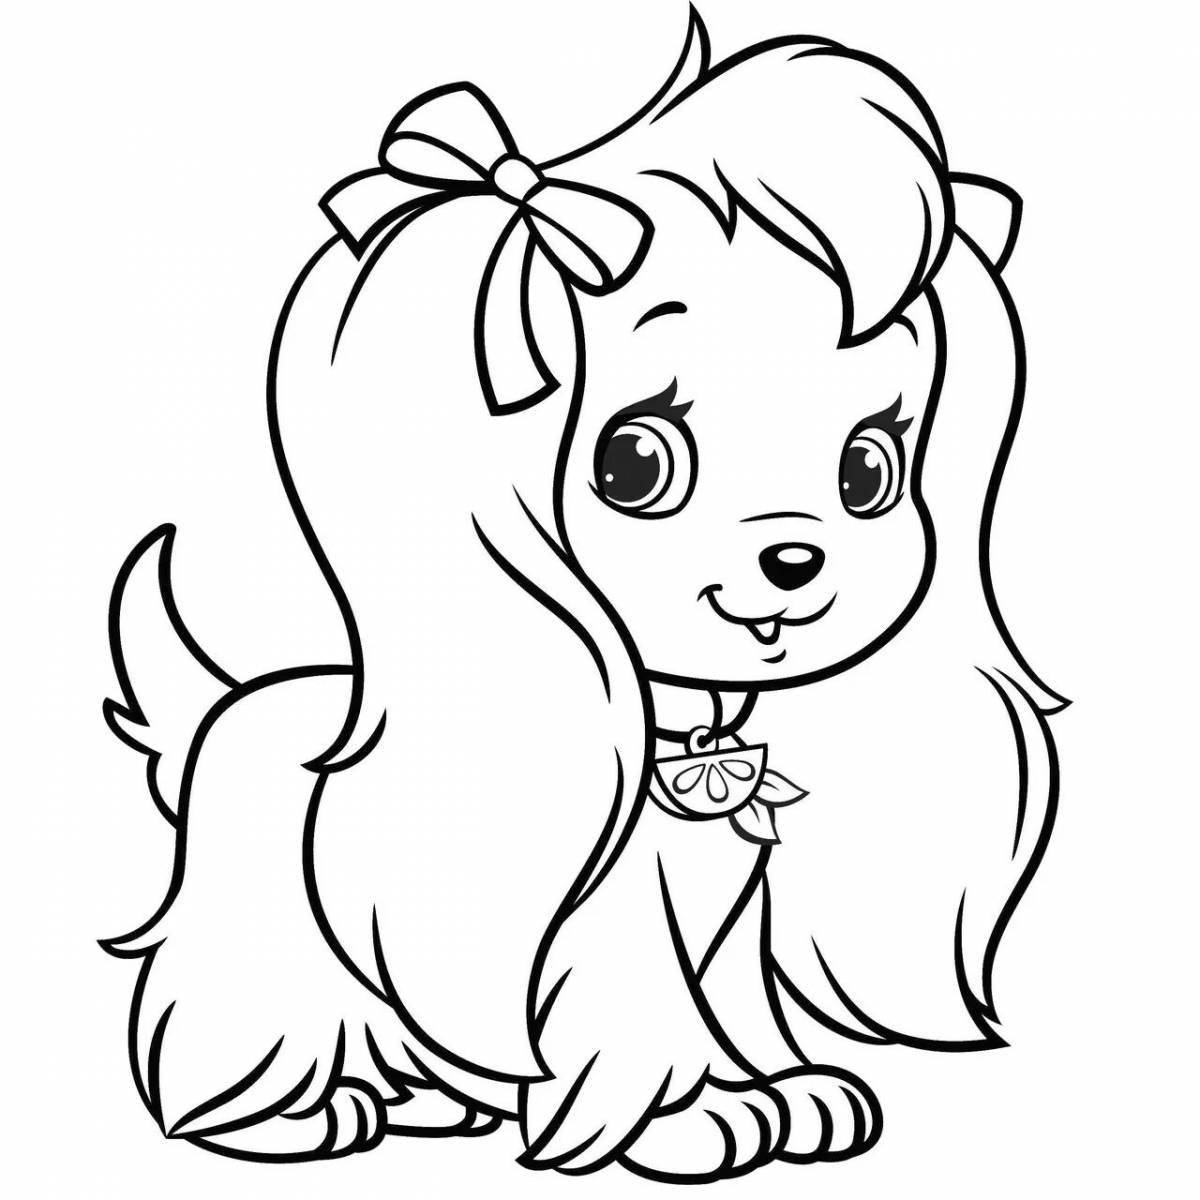 Precious animal coloring pages for girls